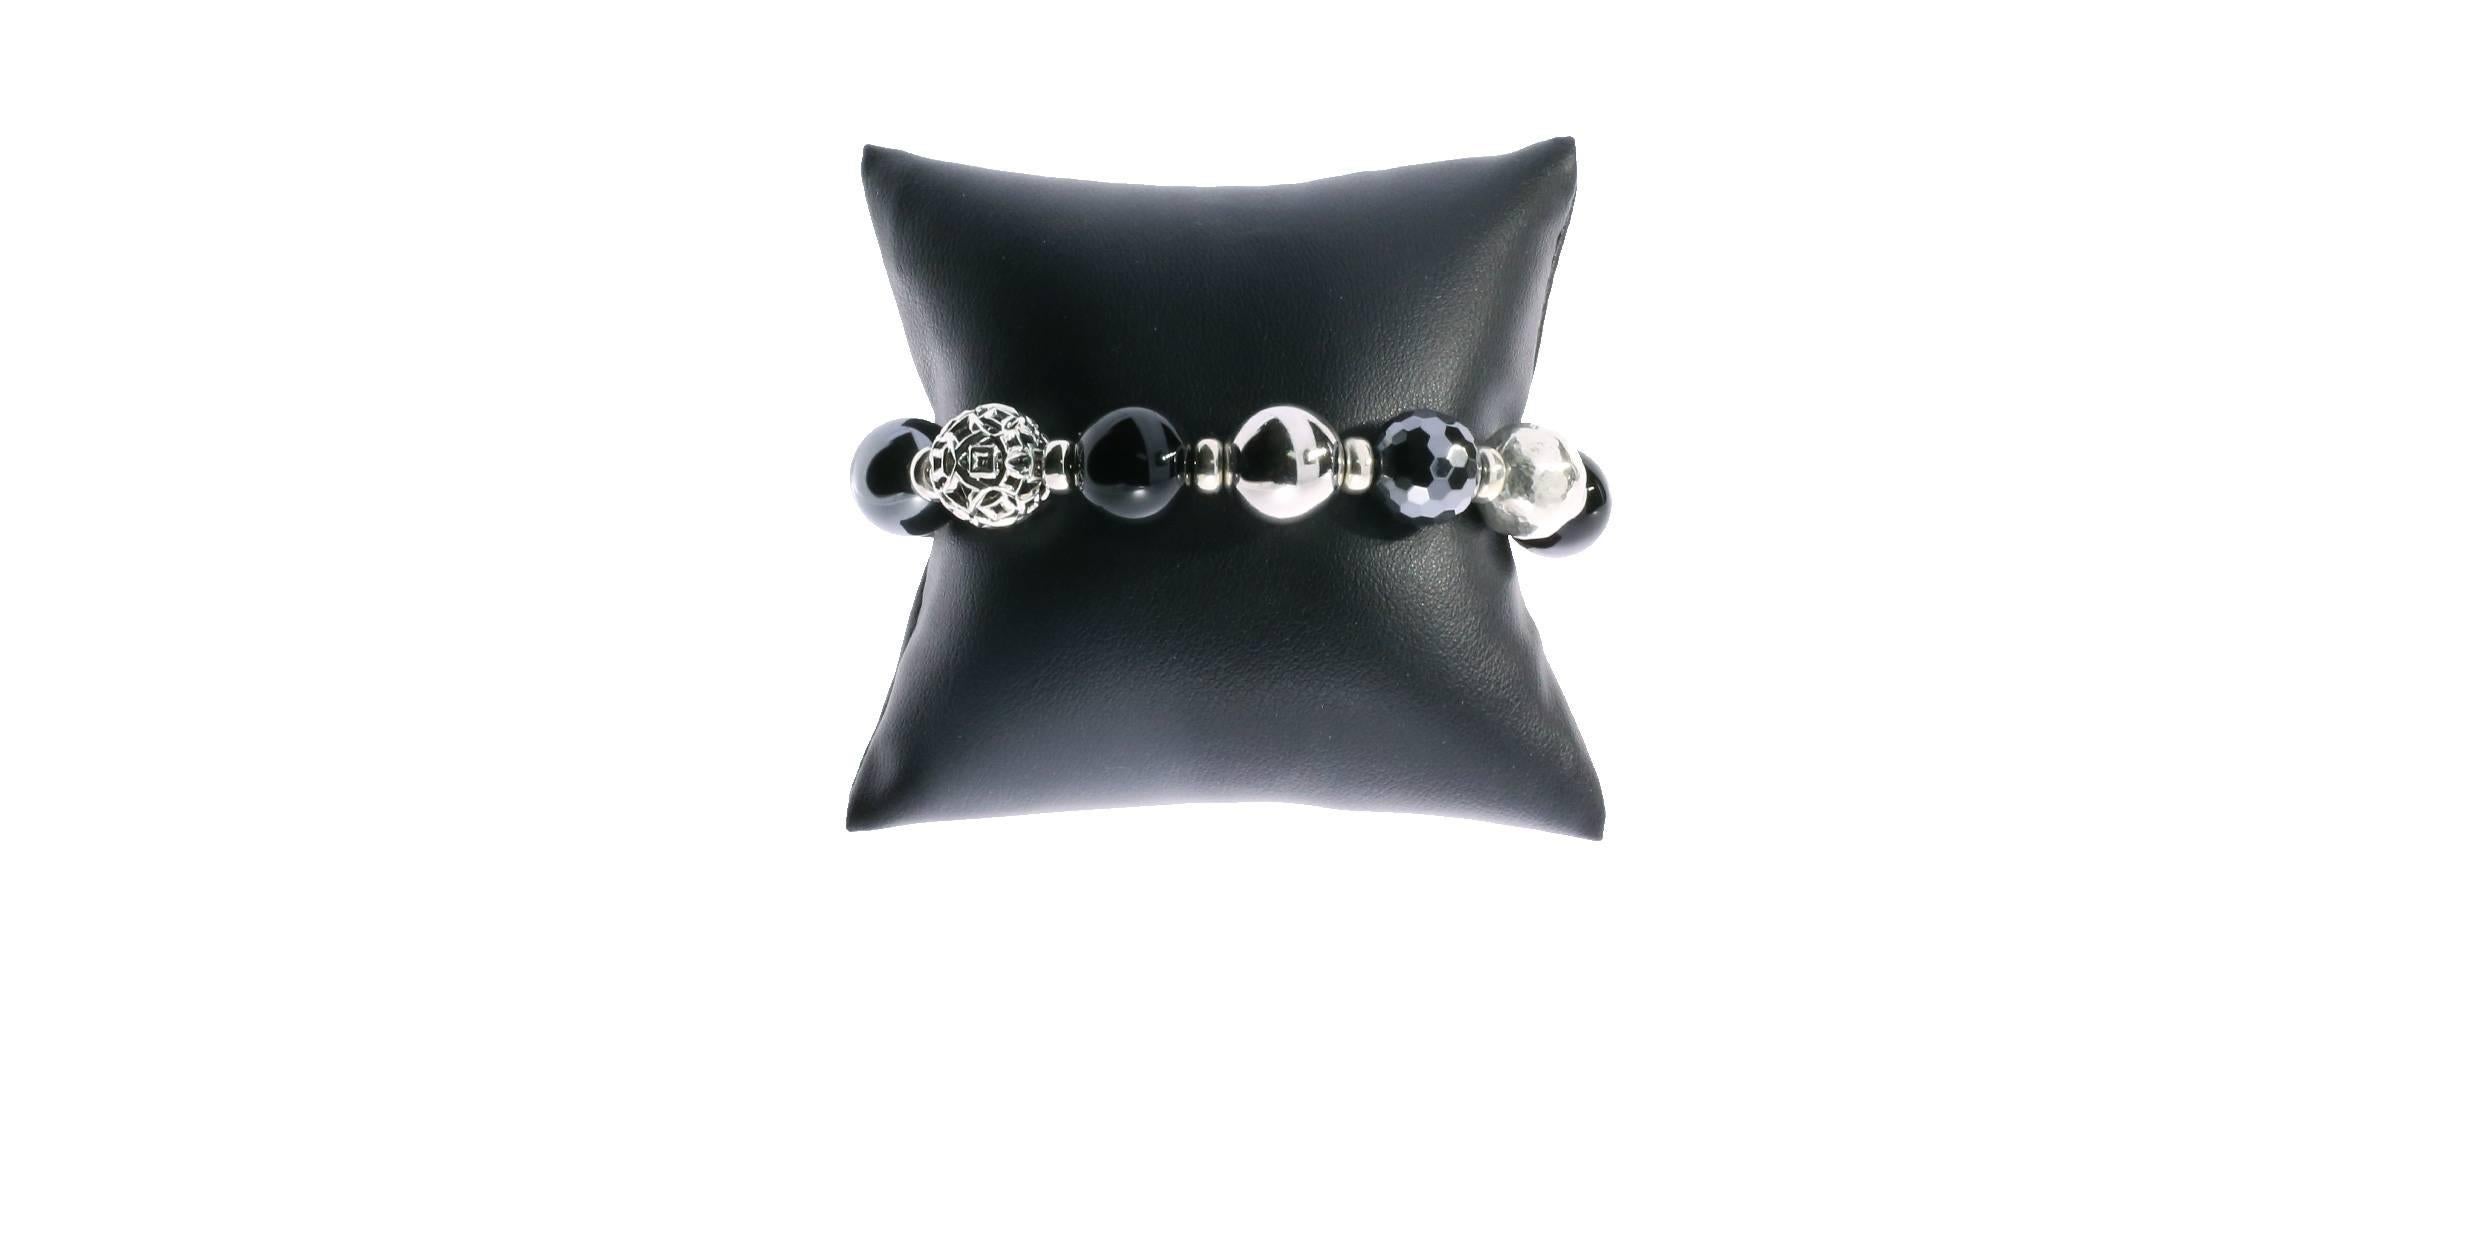 This David Yurman bead bracelet is from the Elements collection. It features sterling silver, onyx, and hematite beads, strung on sterling silver box chain, Each bead has a unique design making this bracelet really stand out. A gorgeous addition to